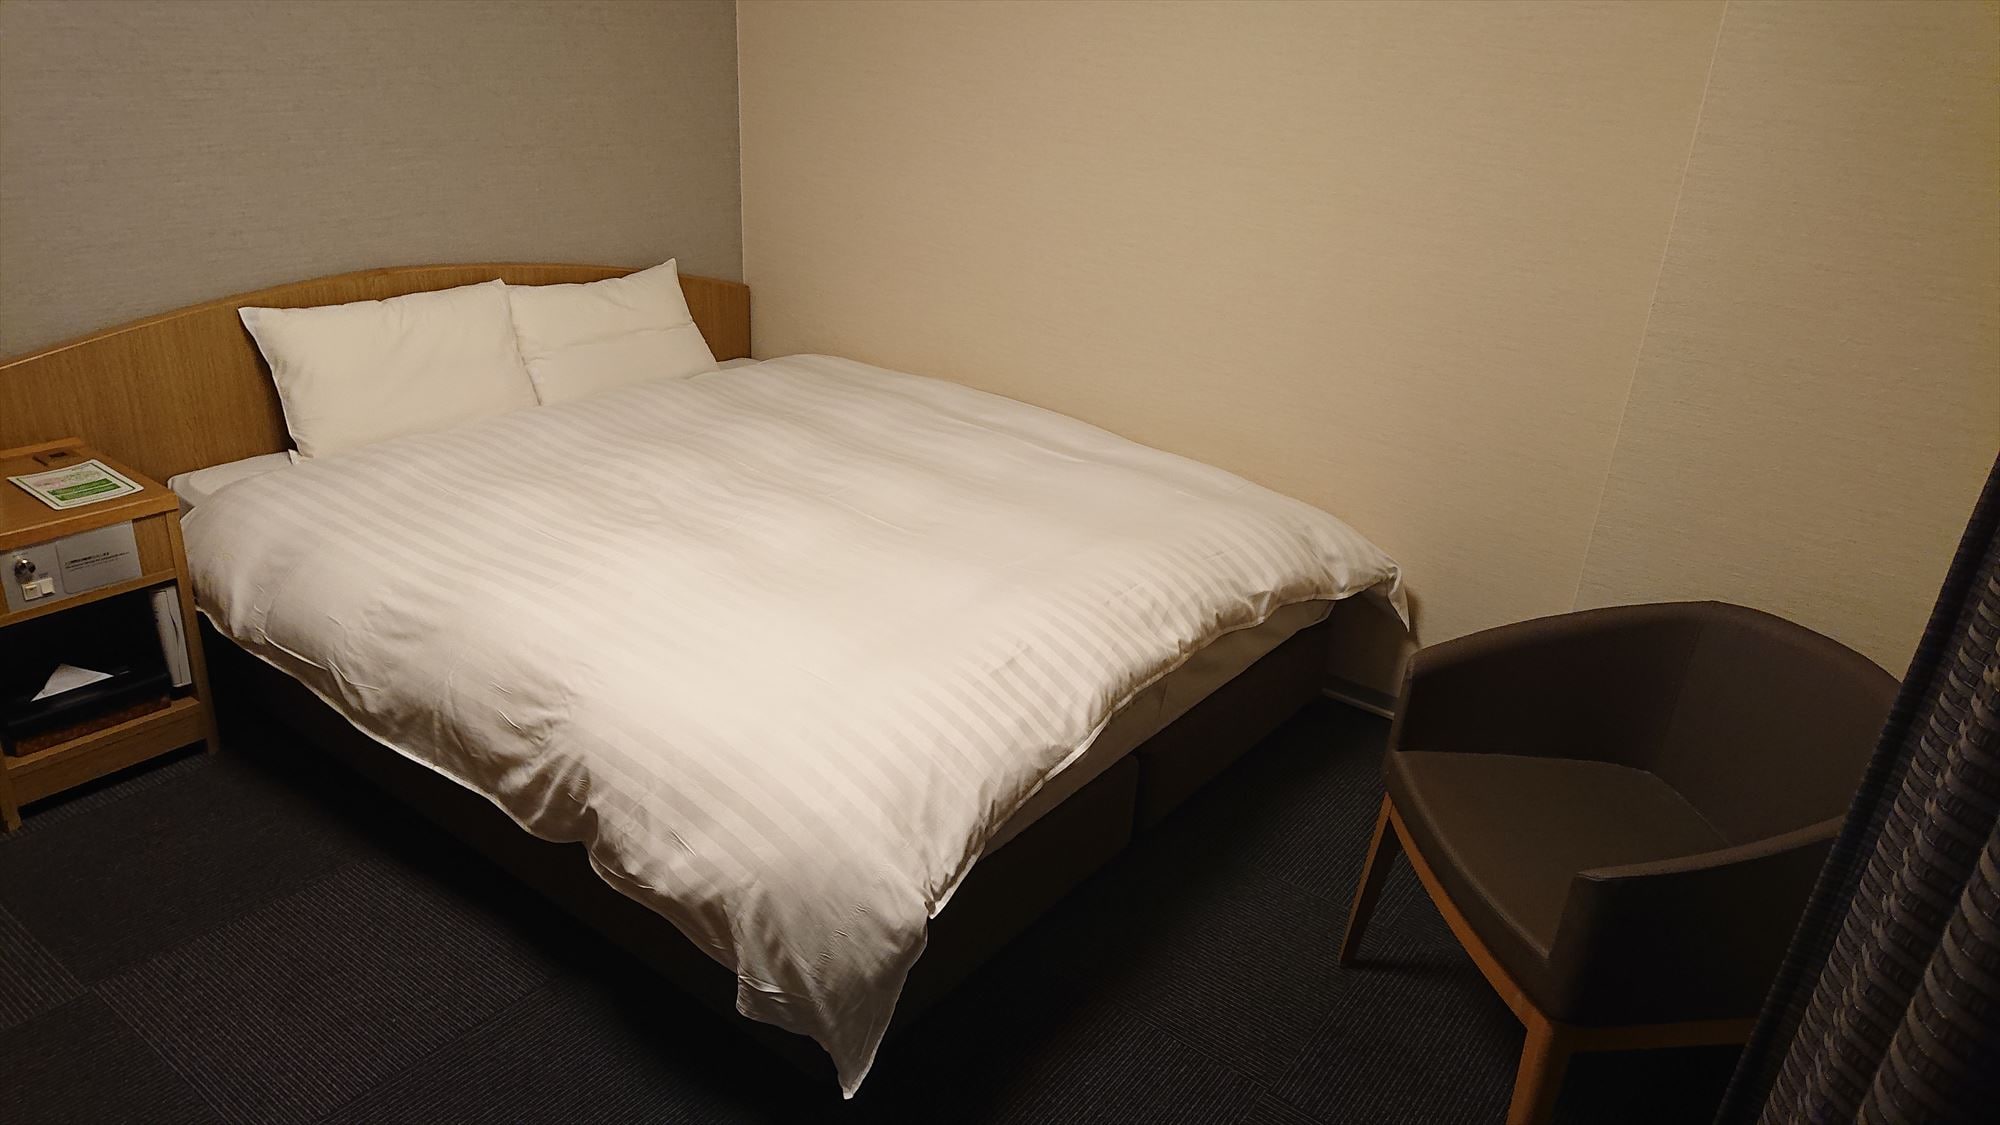 ◆ Non-smoking / smoking queen room 18.0 square meters Bed size 160 cm wide & times; 195 cm long (1 unit)